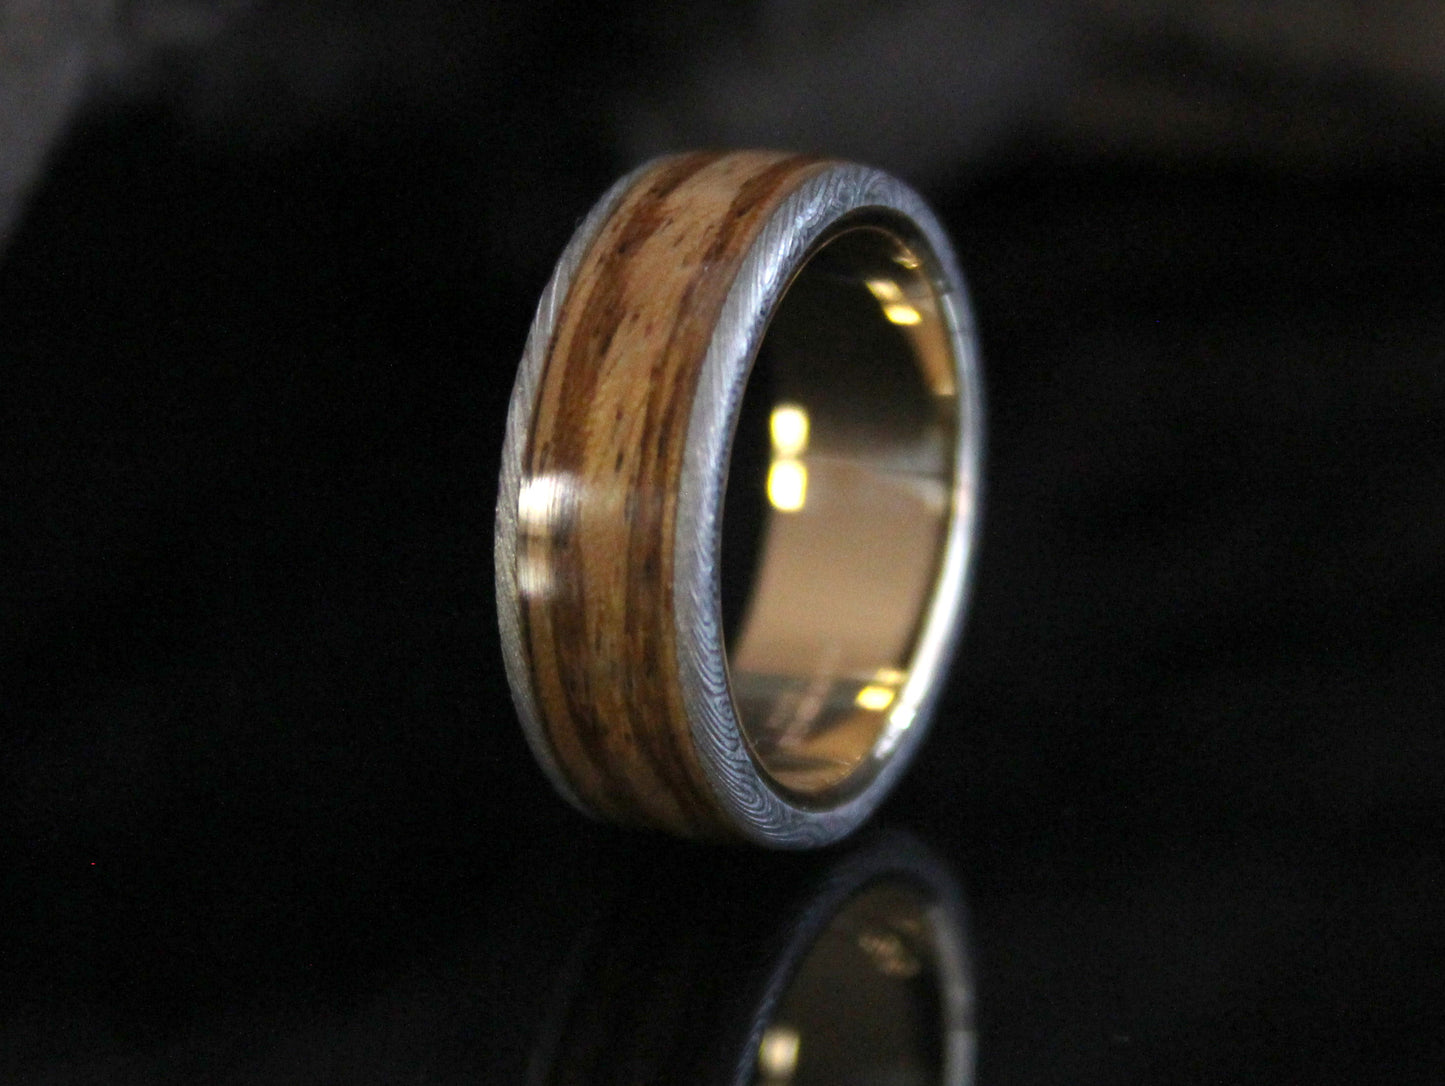 Gold & Damascus Steel Ring with Zebra Wood